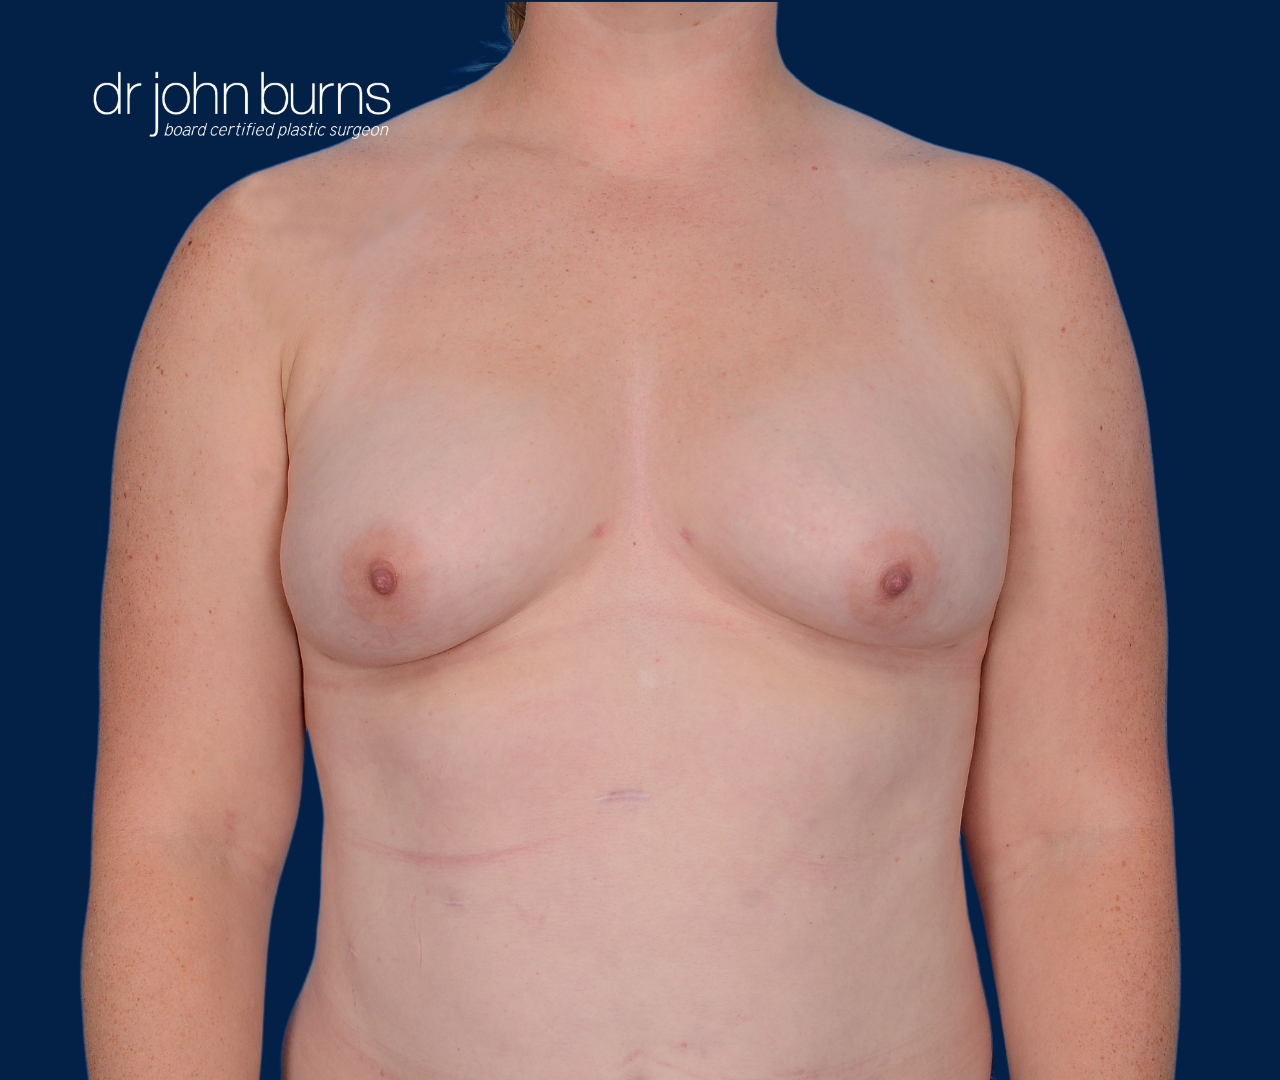 case 16- after fat transfer to breast by top plastic surgeon, Dr. John Burns